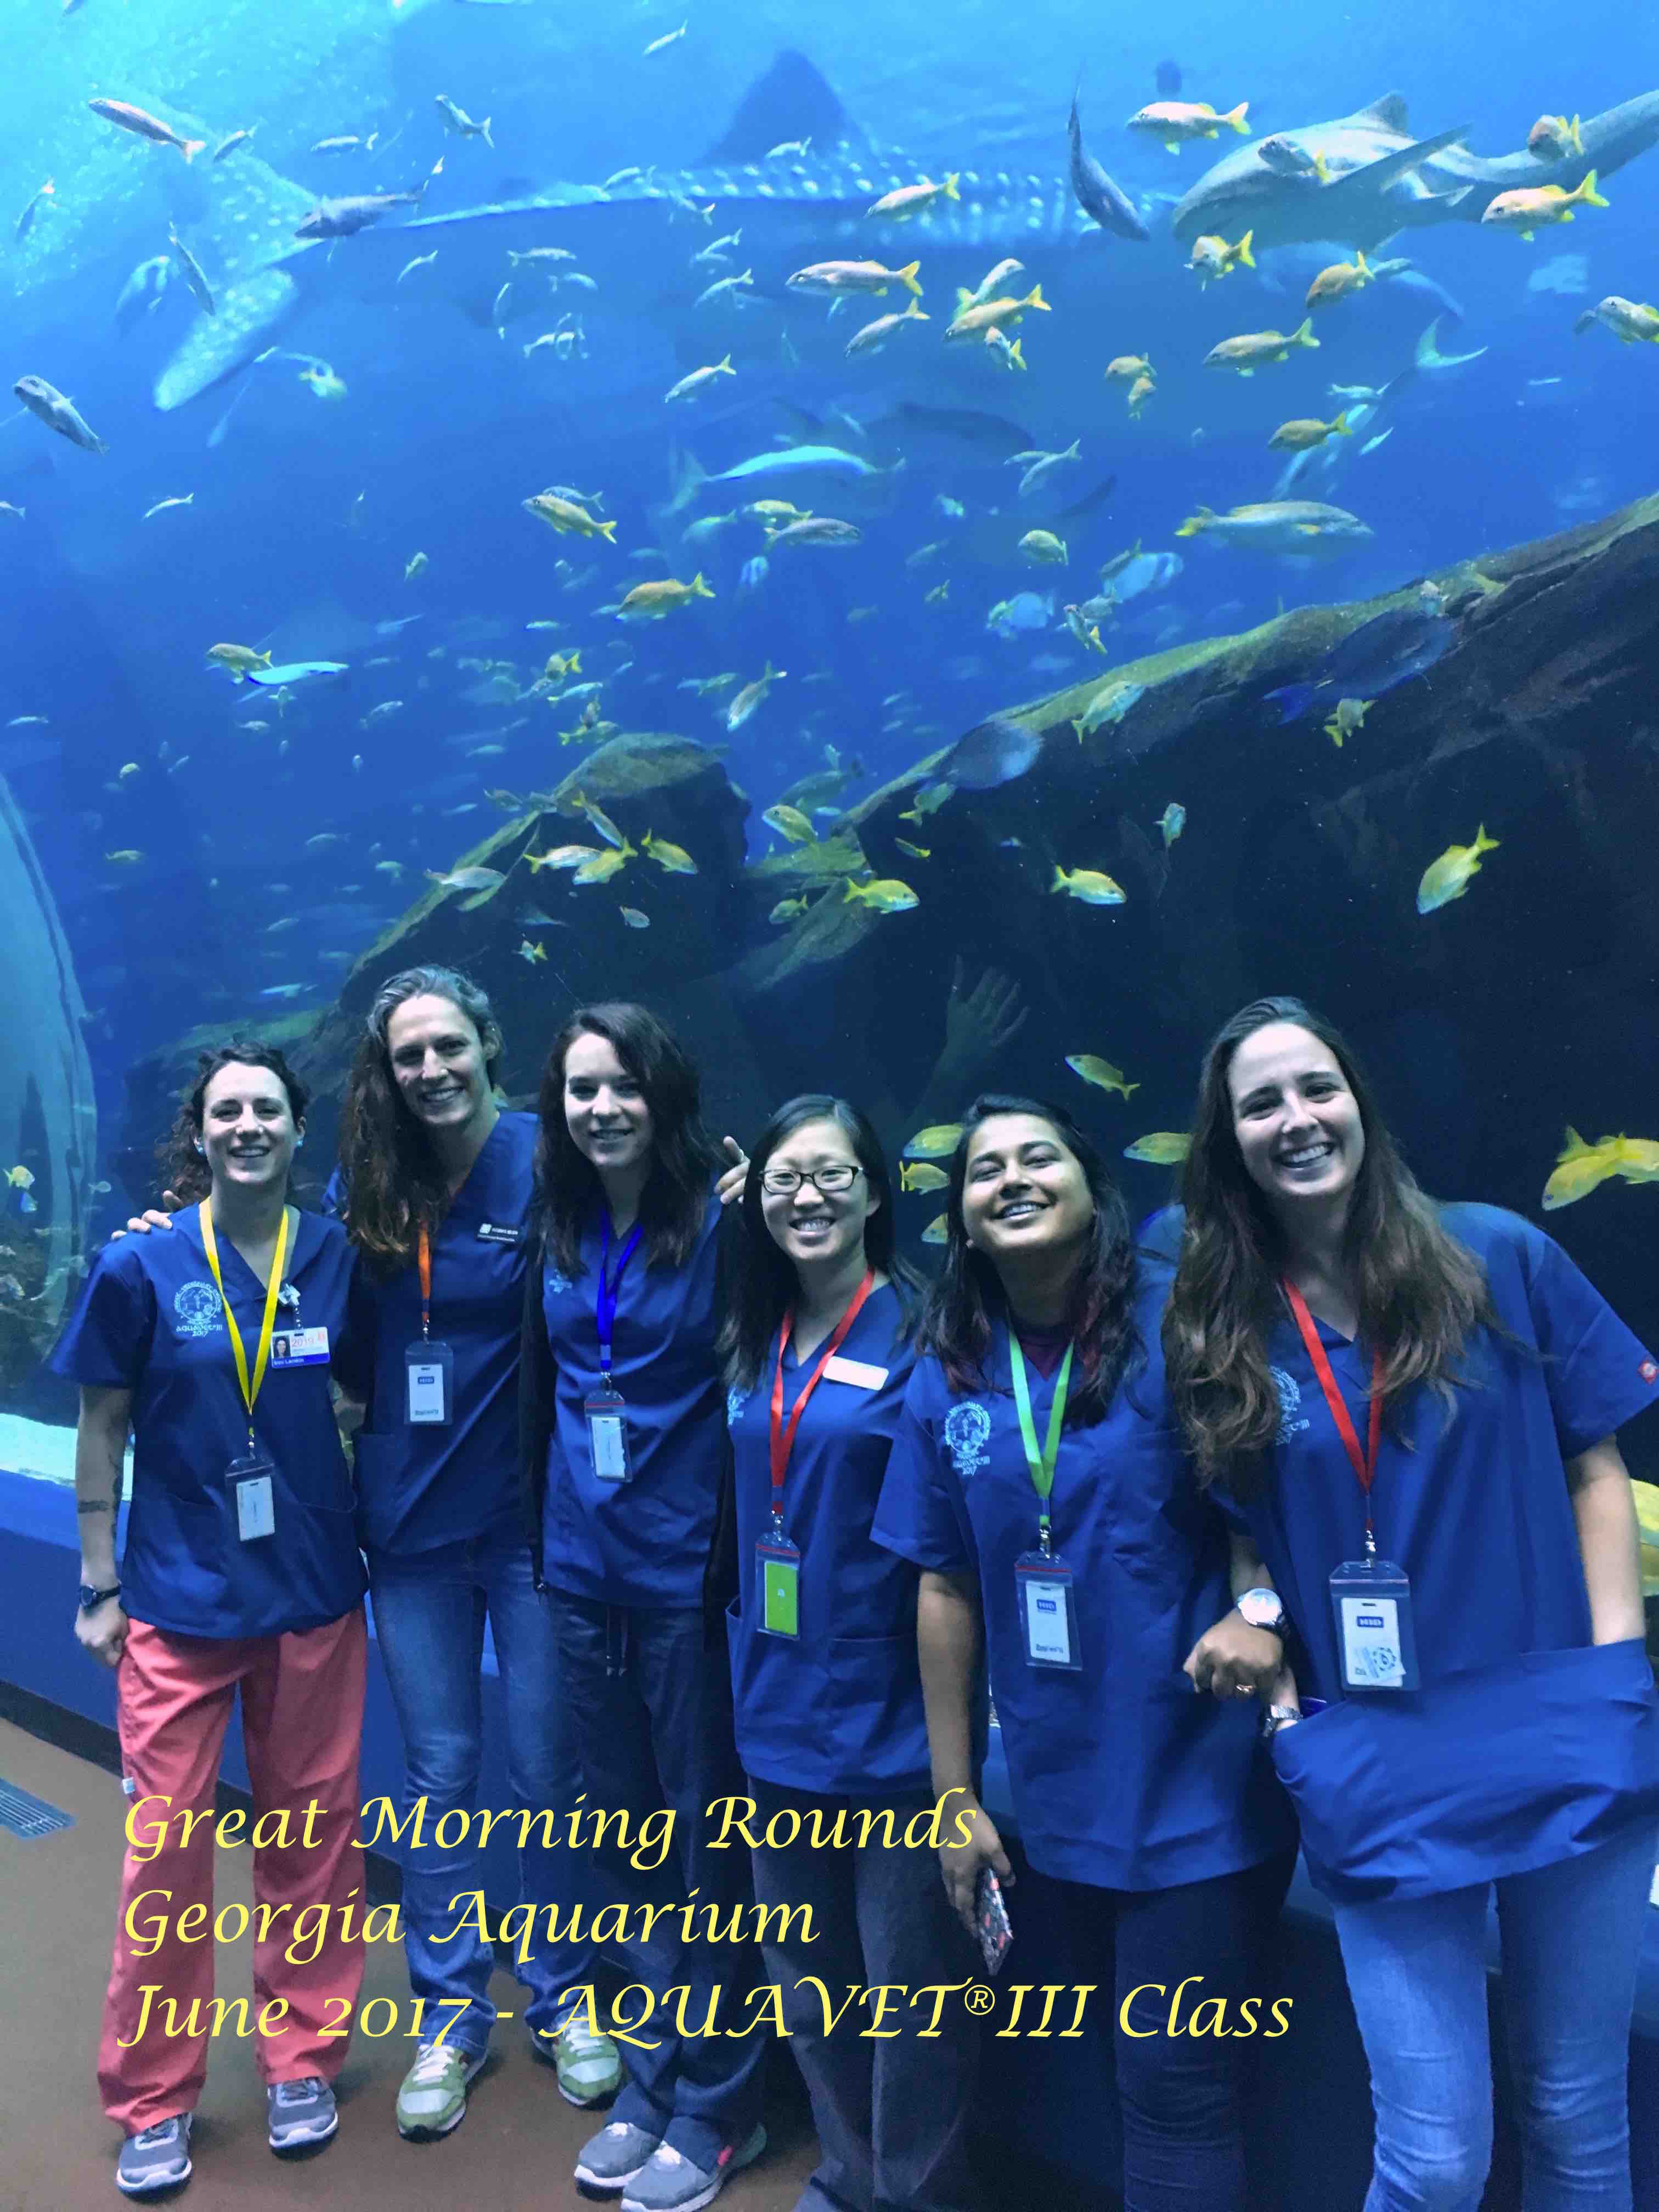 Students in front of large fish tank